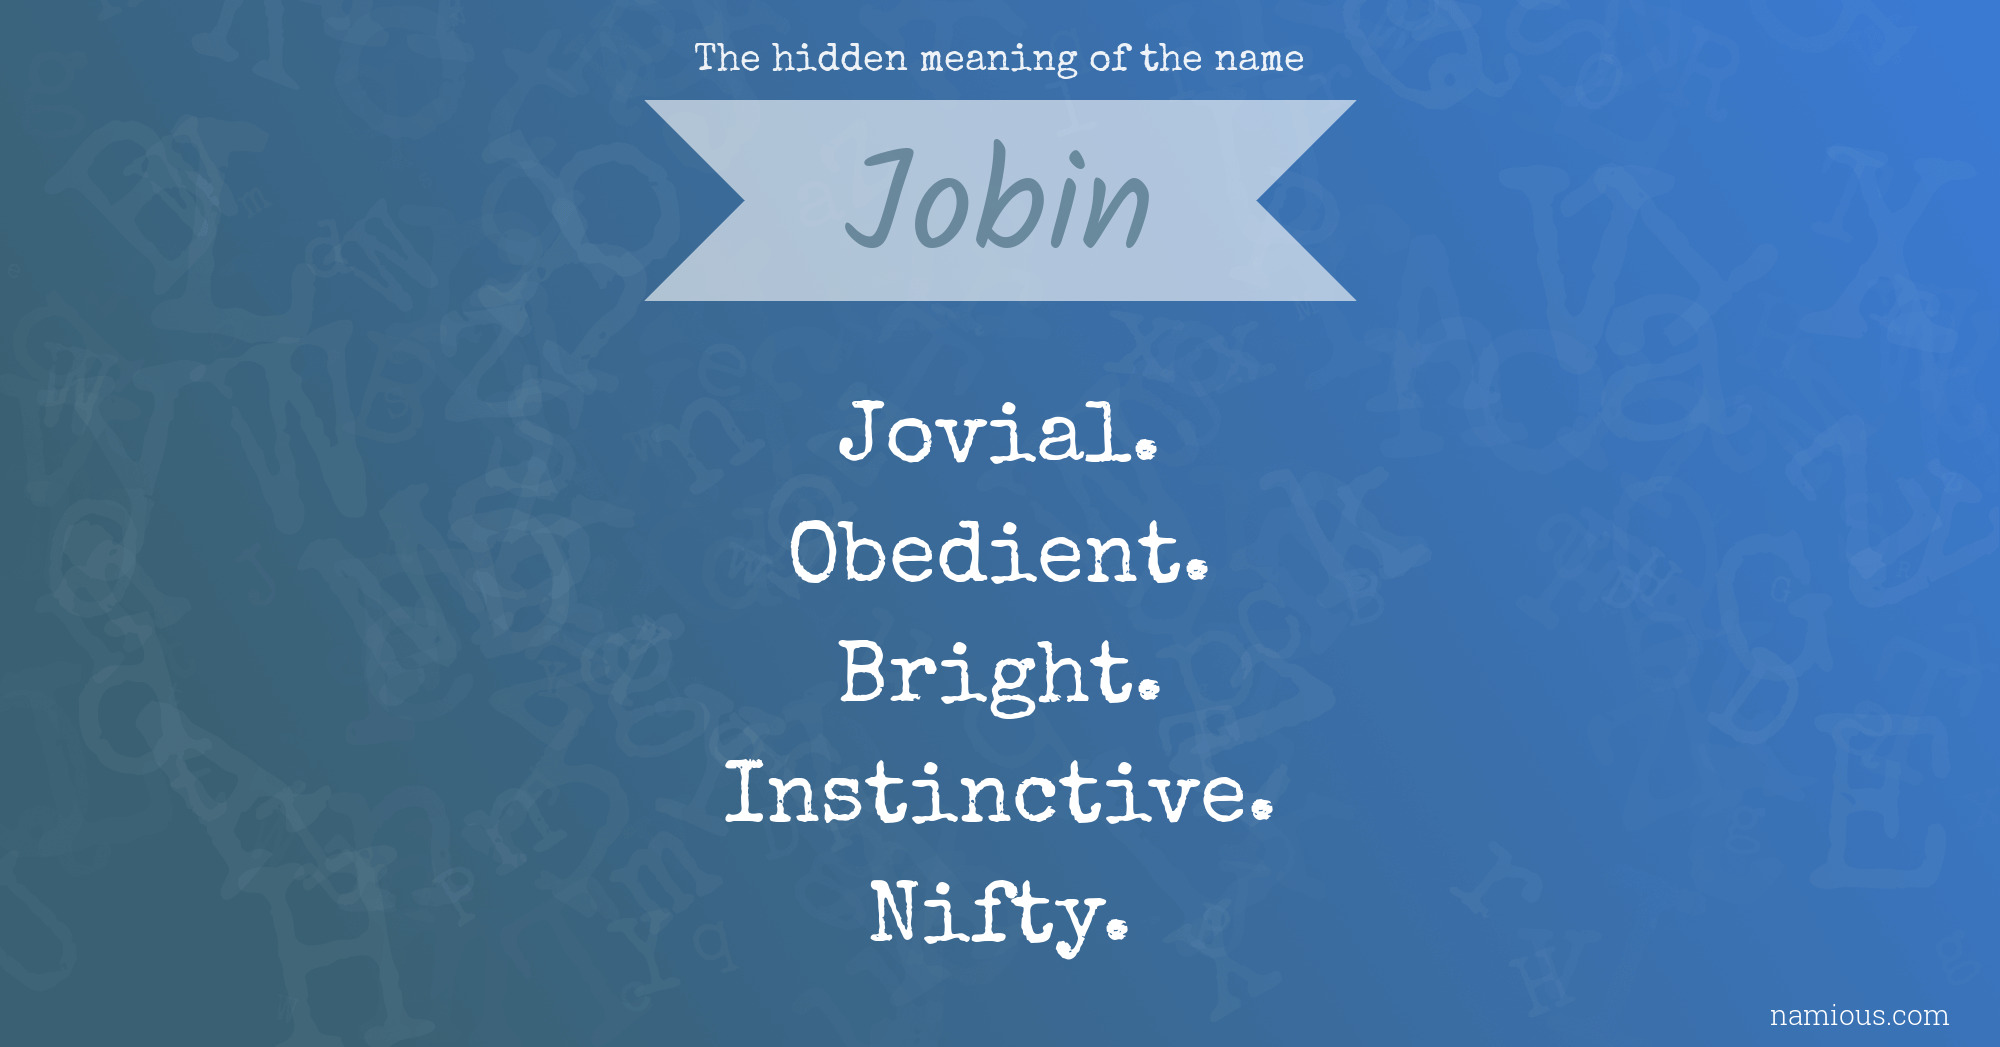 The hidden meaning of the name Jobin